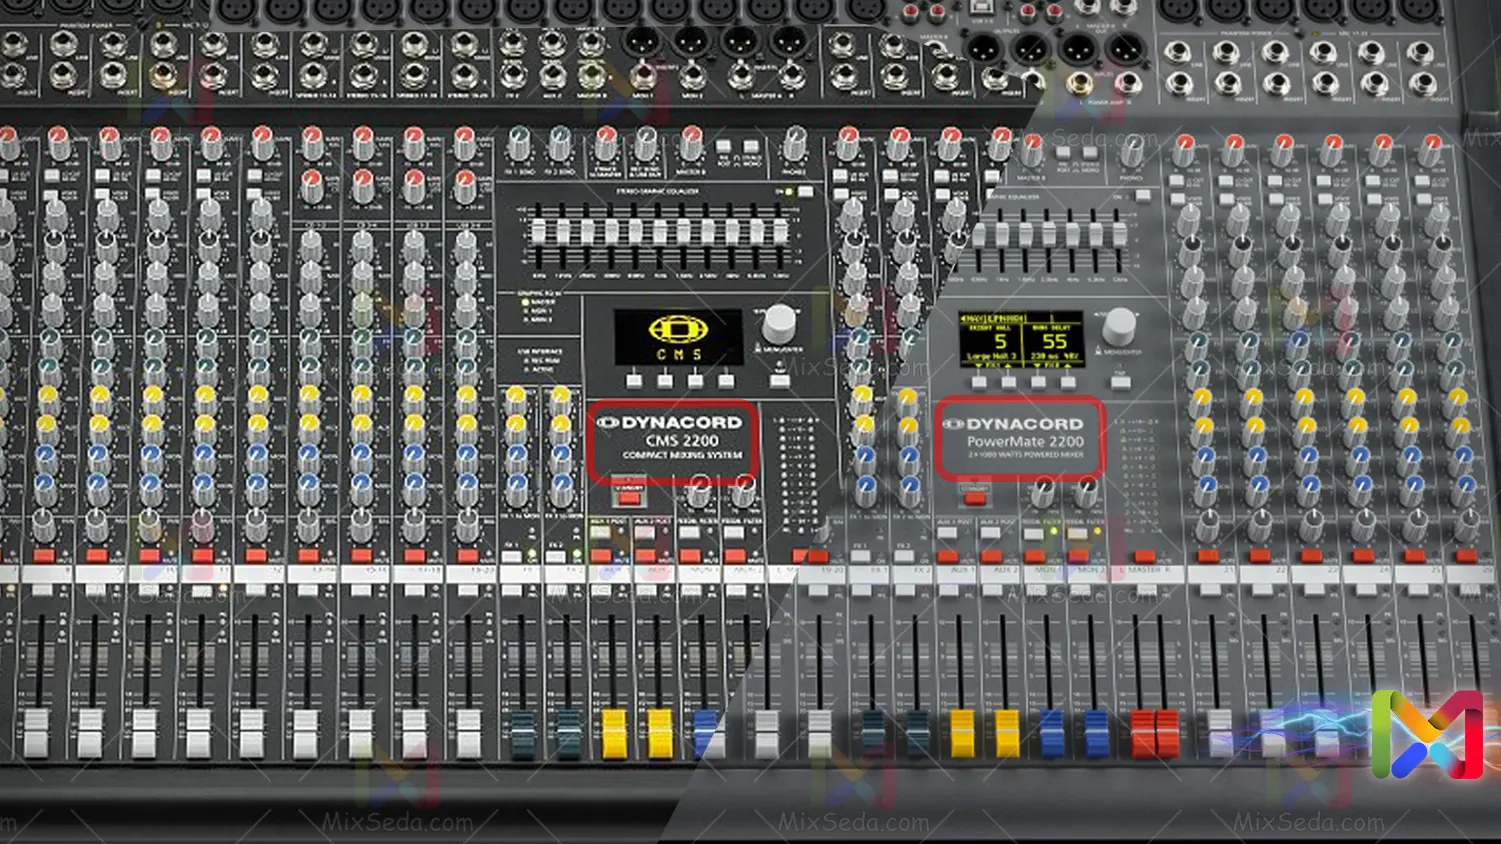 What is the difference between a mixer and a power mixer?